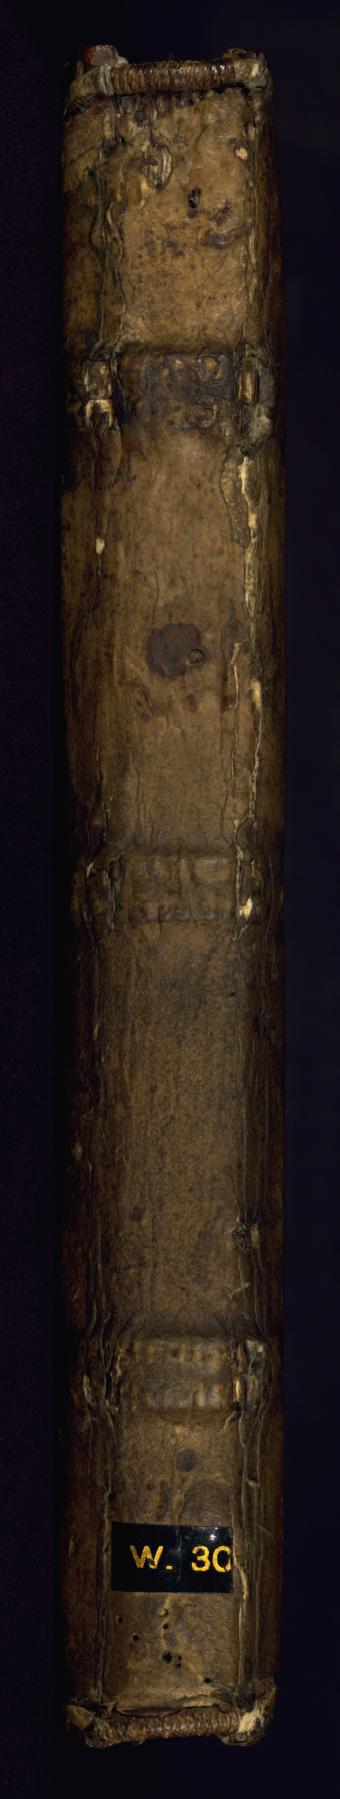 Image for Binding from Gloss on The lamentations of Jeremiah